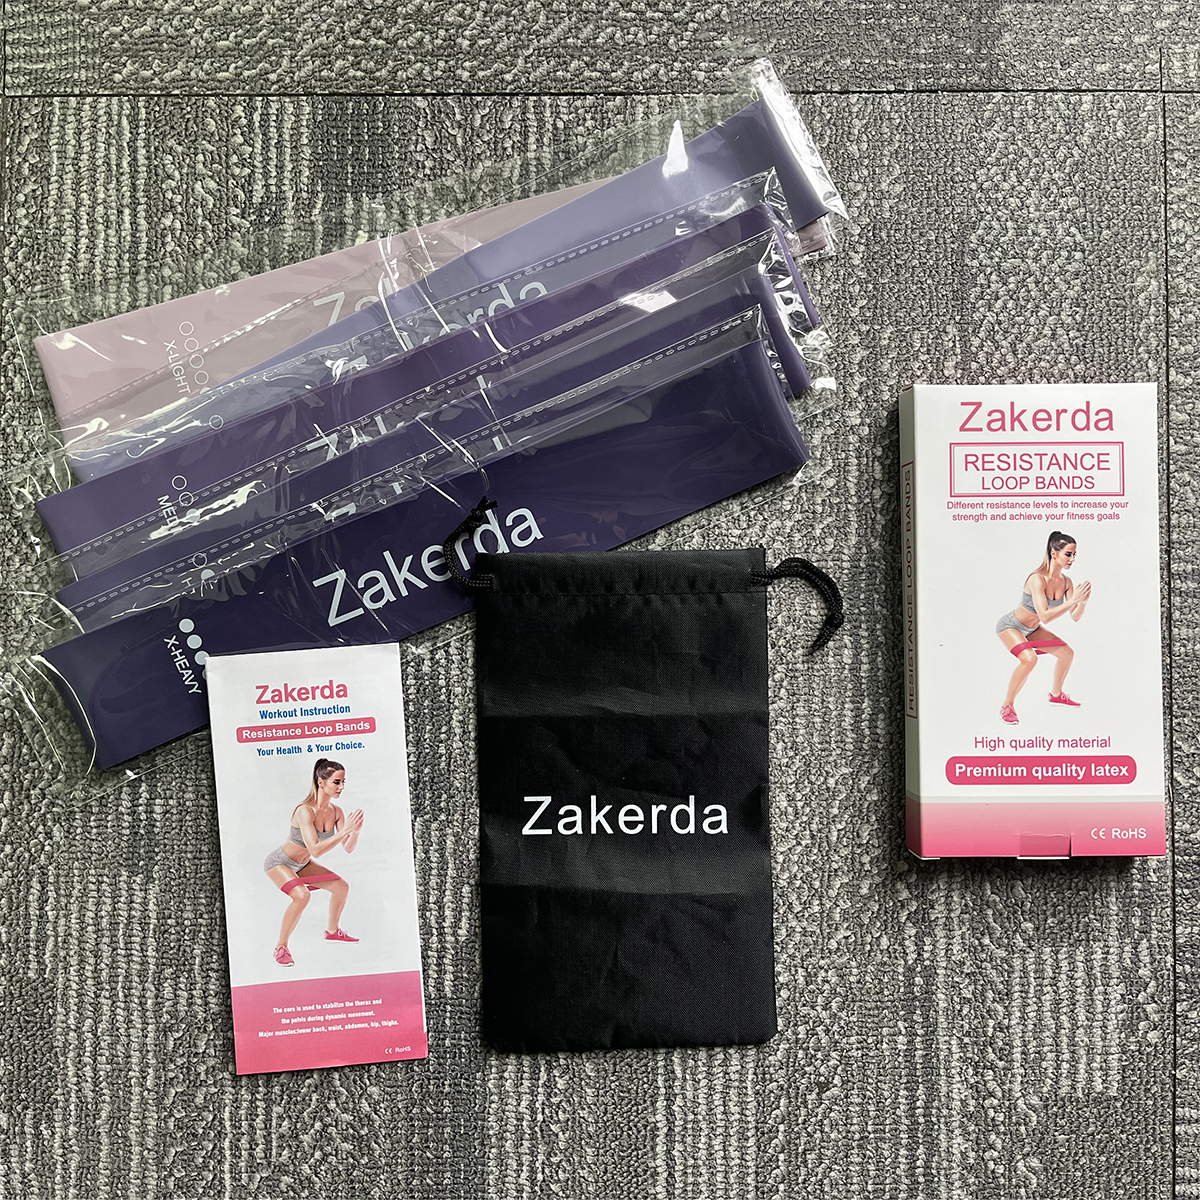 Zakerda Resistance Loop Exercise Bands with Instruction Guide and Carry Bag, Set of 5